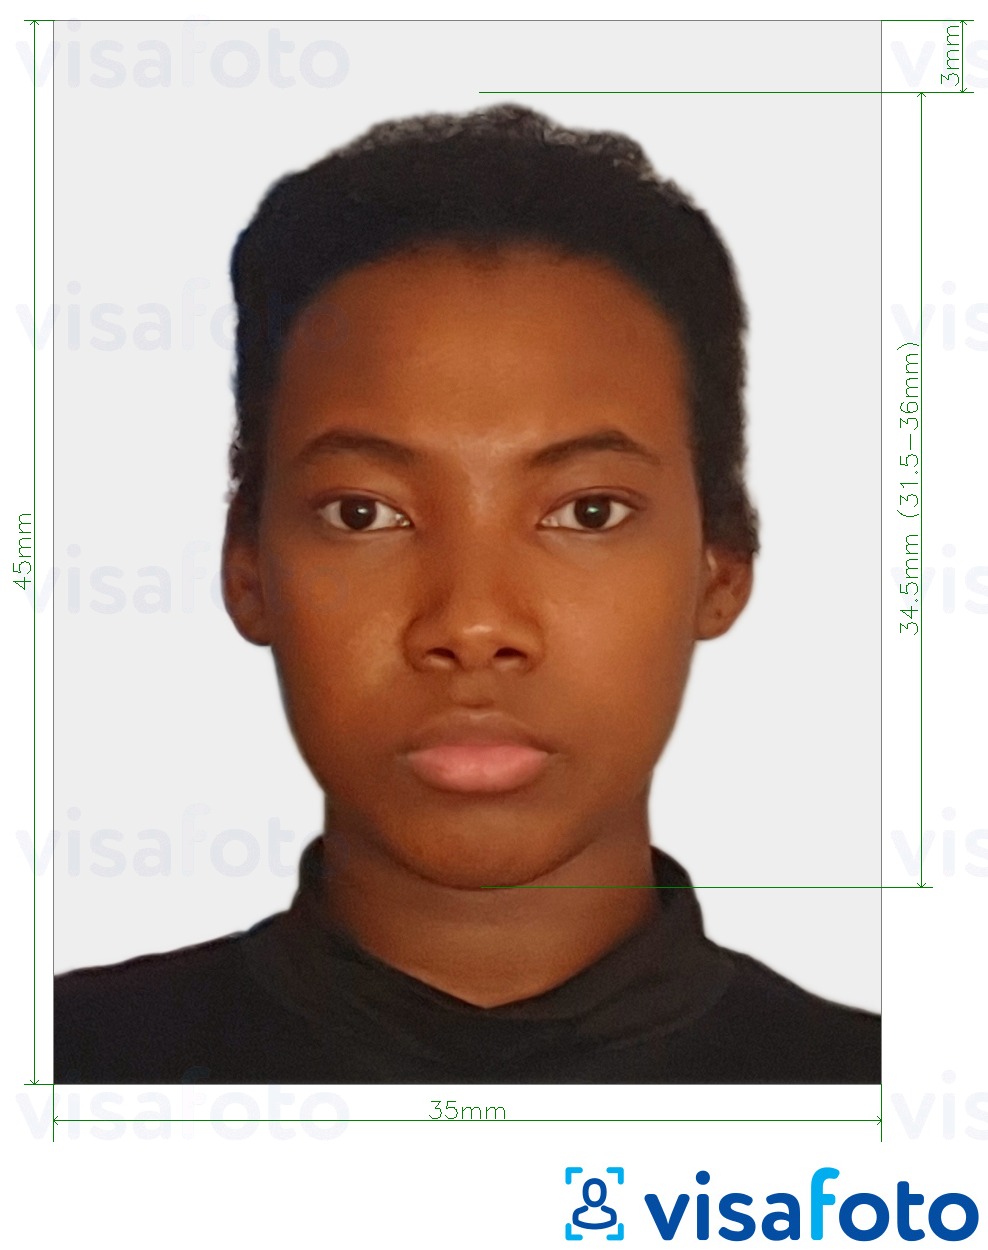 Example of photo for Togo passport 4.5x3.5 cm (45x35mm) with exact size specification